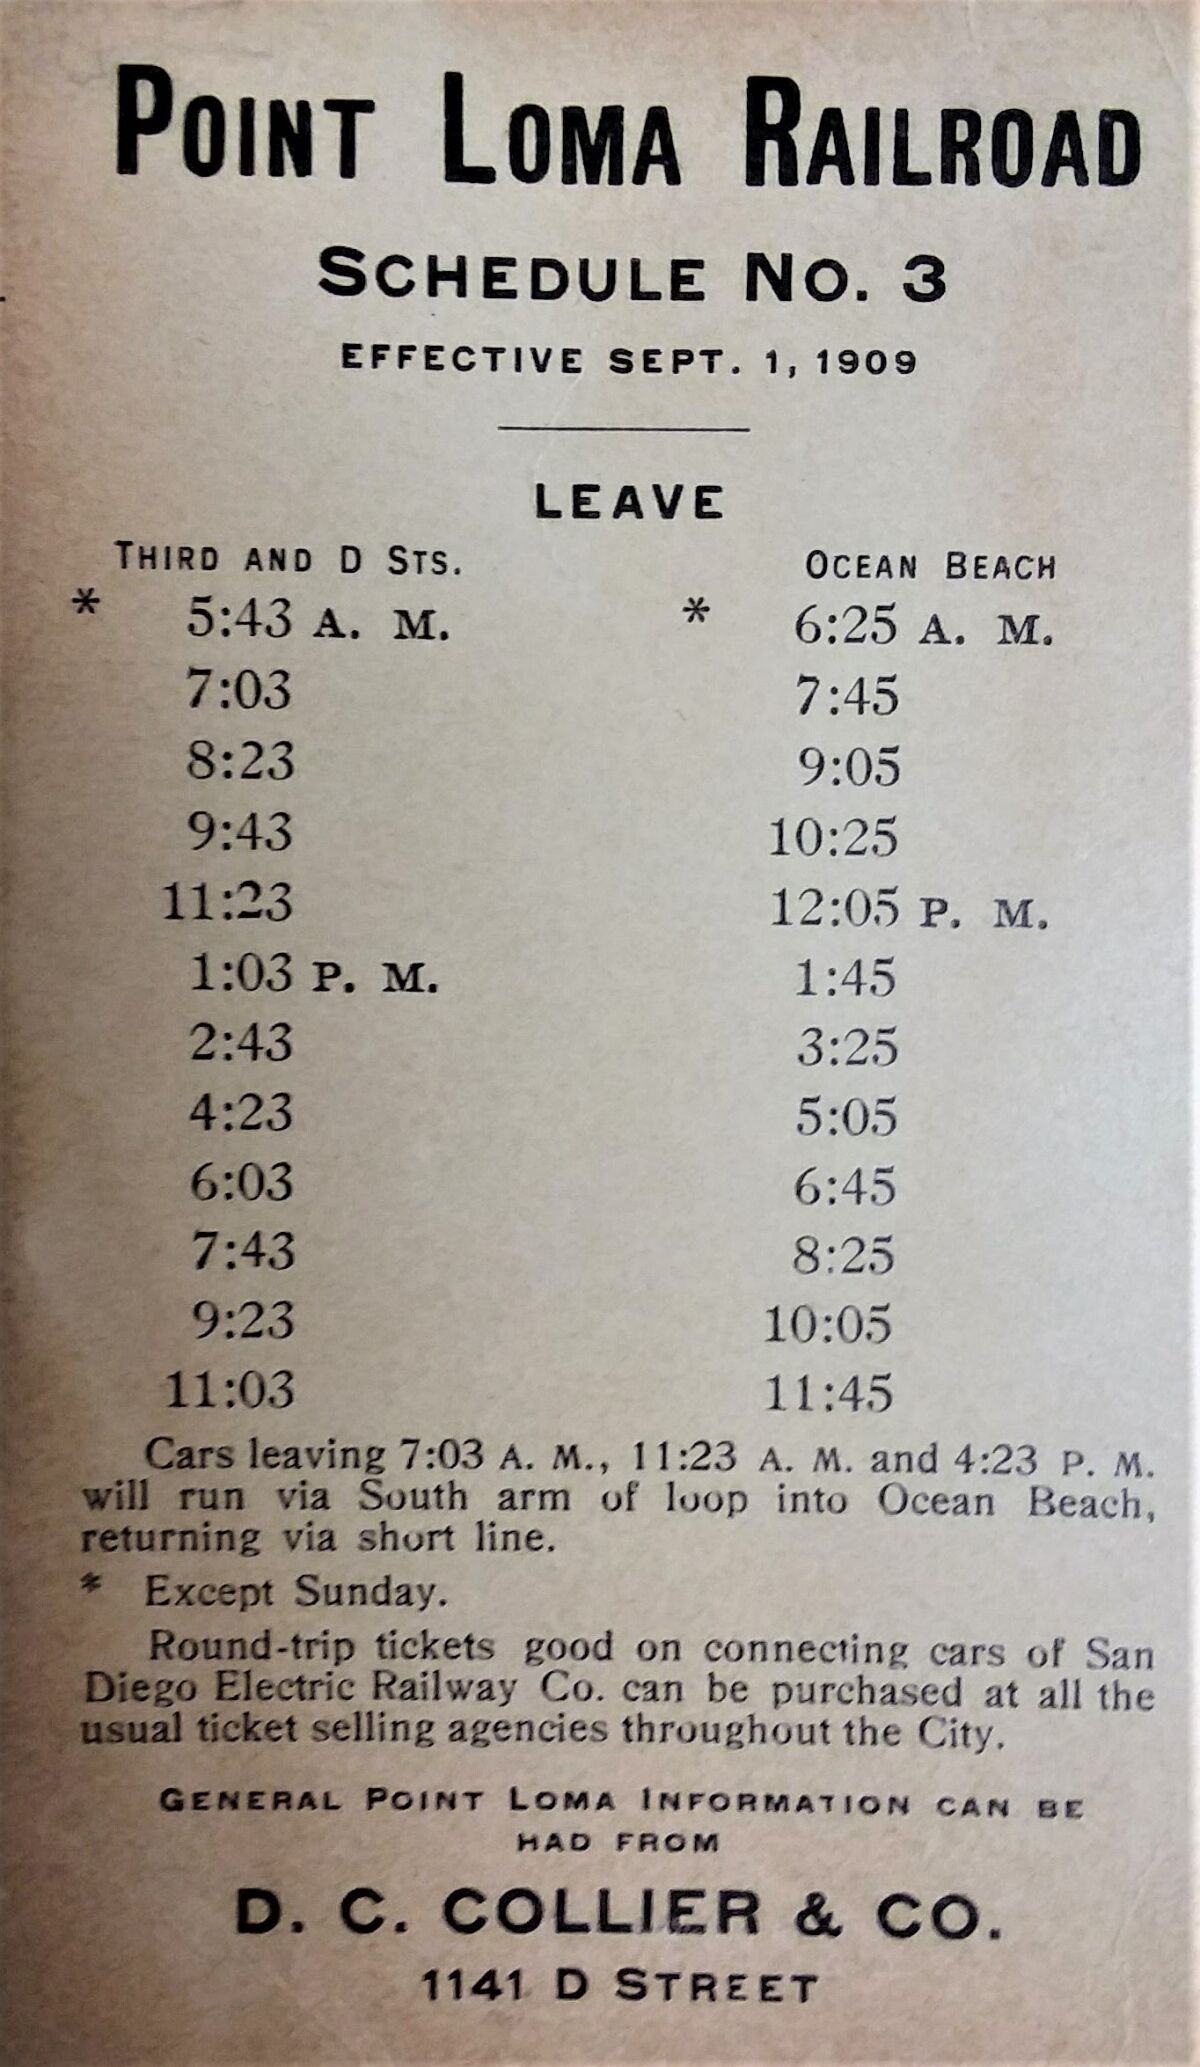 The Point Loma Railroad's daily schedule from 1909.